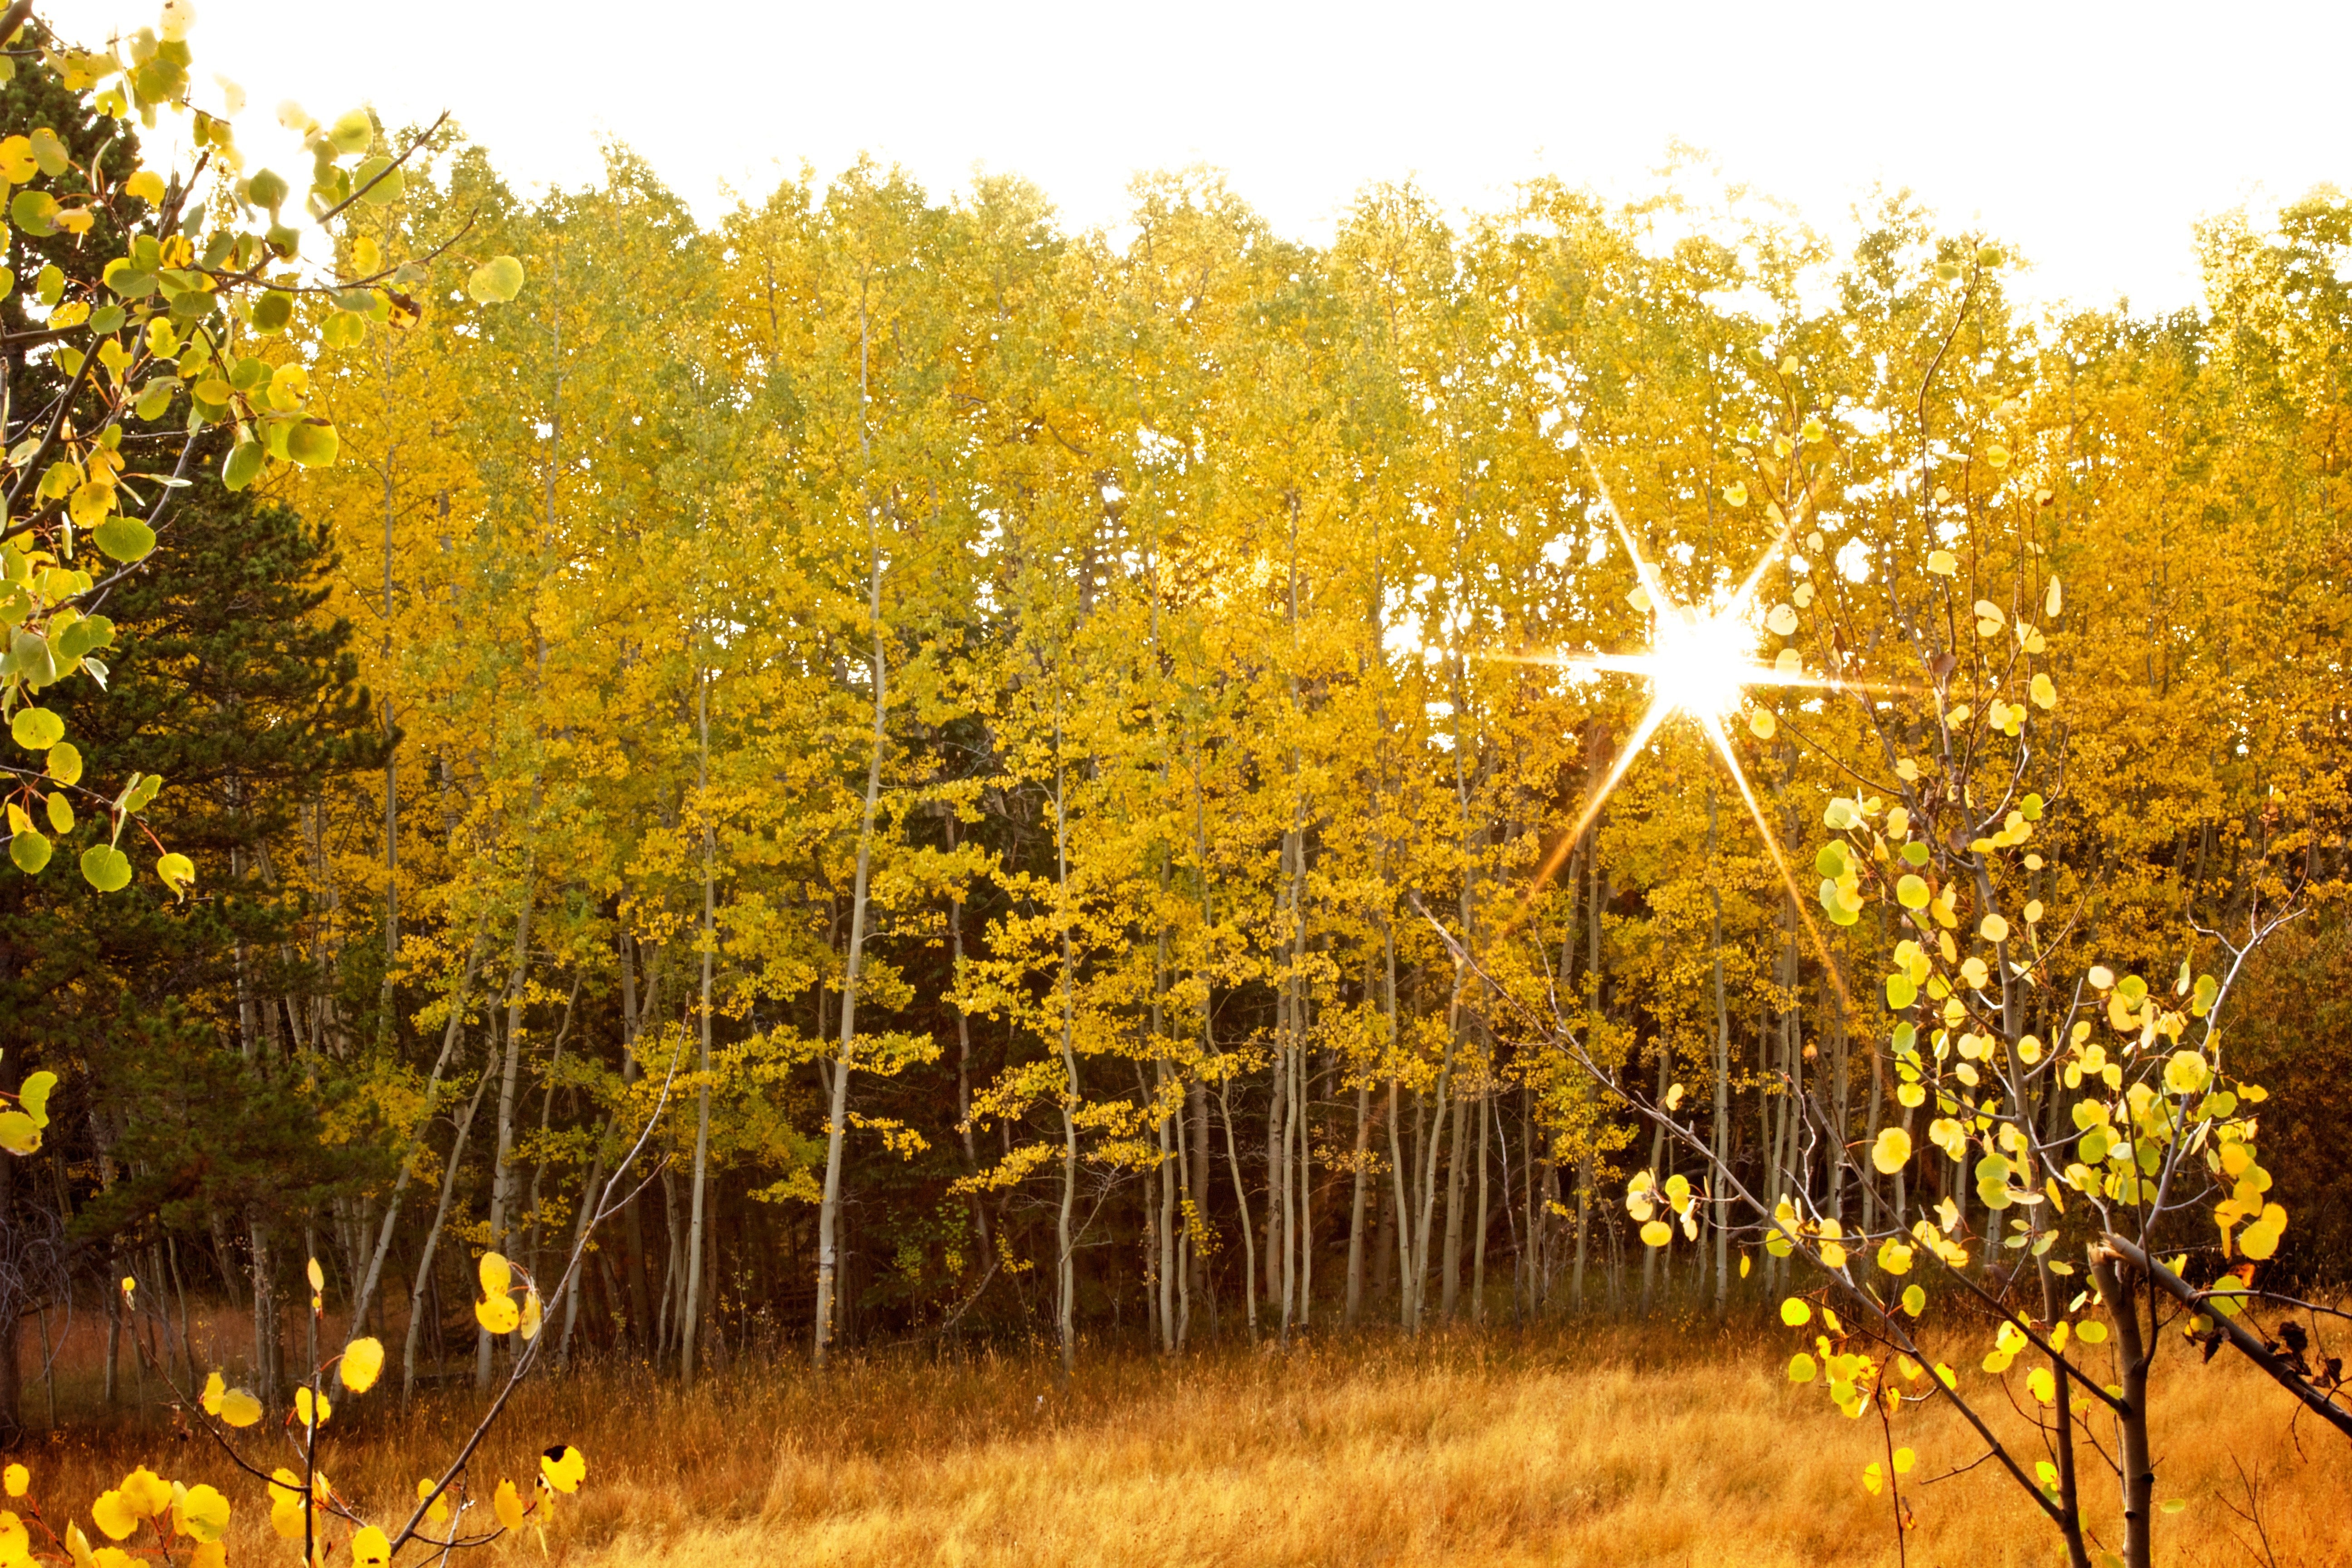 The sun shining through the bright yellow leaves of aspen trees in a grove on an autumn day.